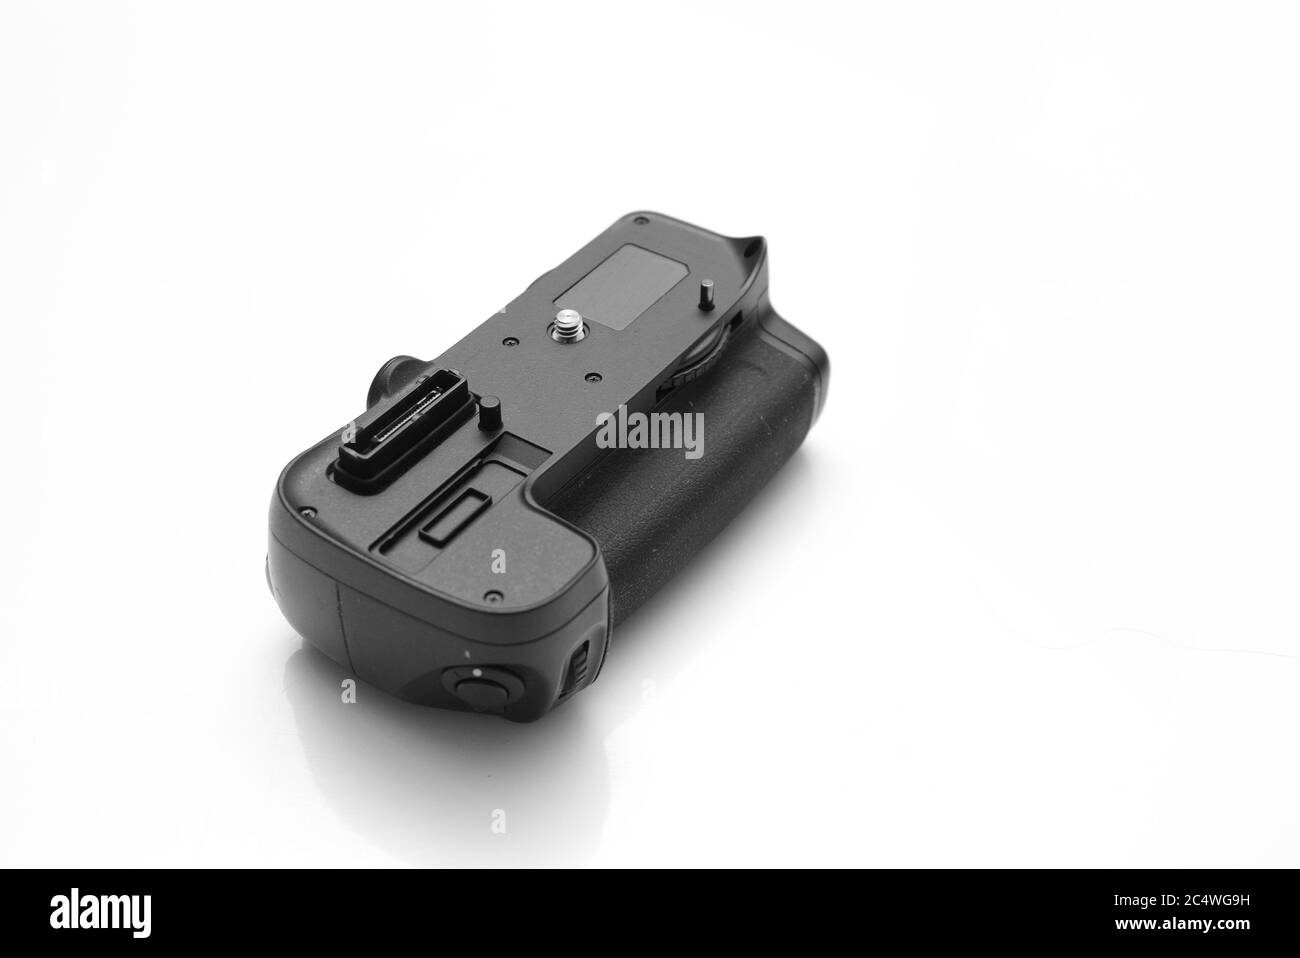 Battery Grip for Nikon DSLR Cameras isolated on white background. Stock Photo